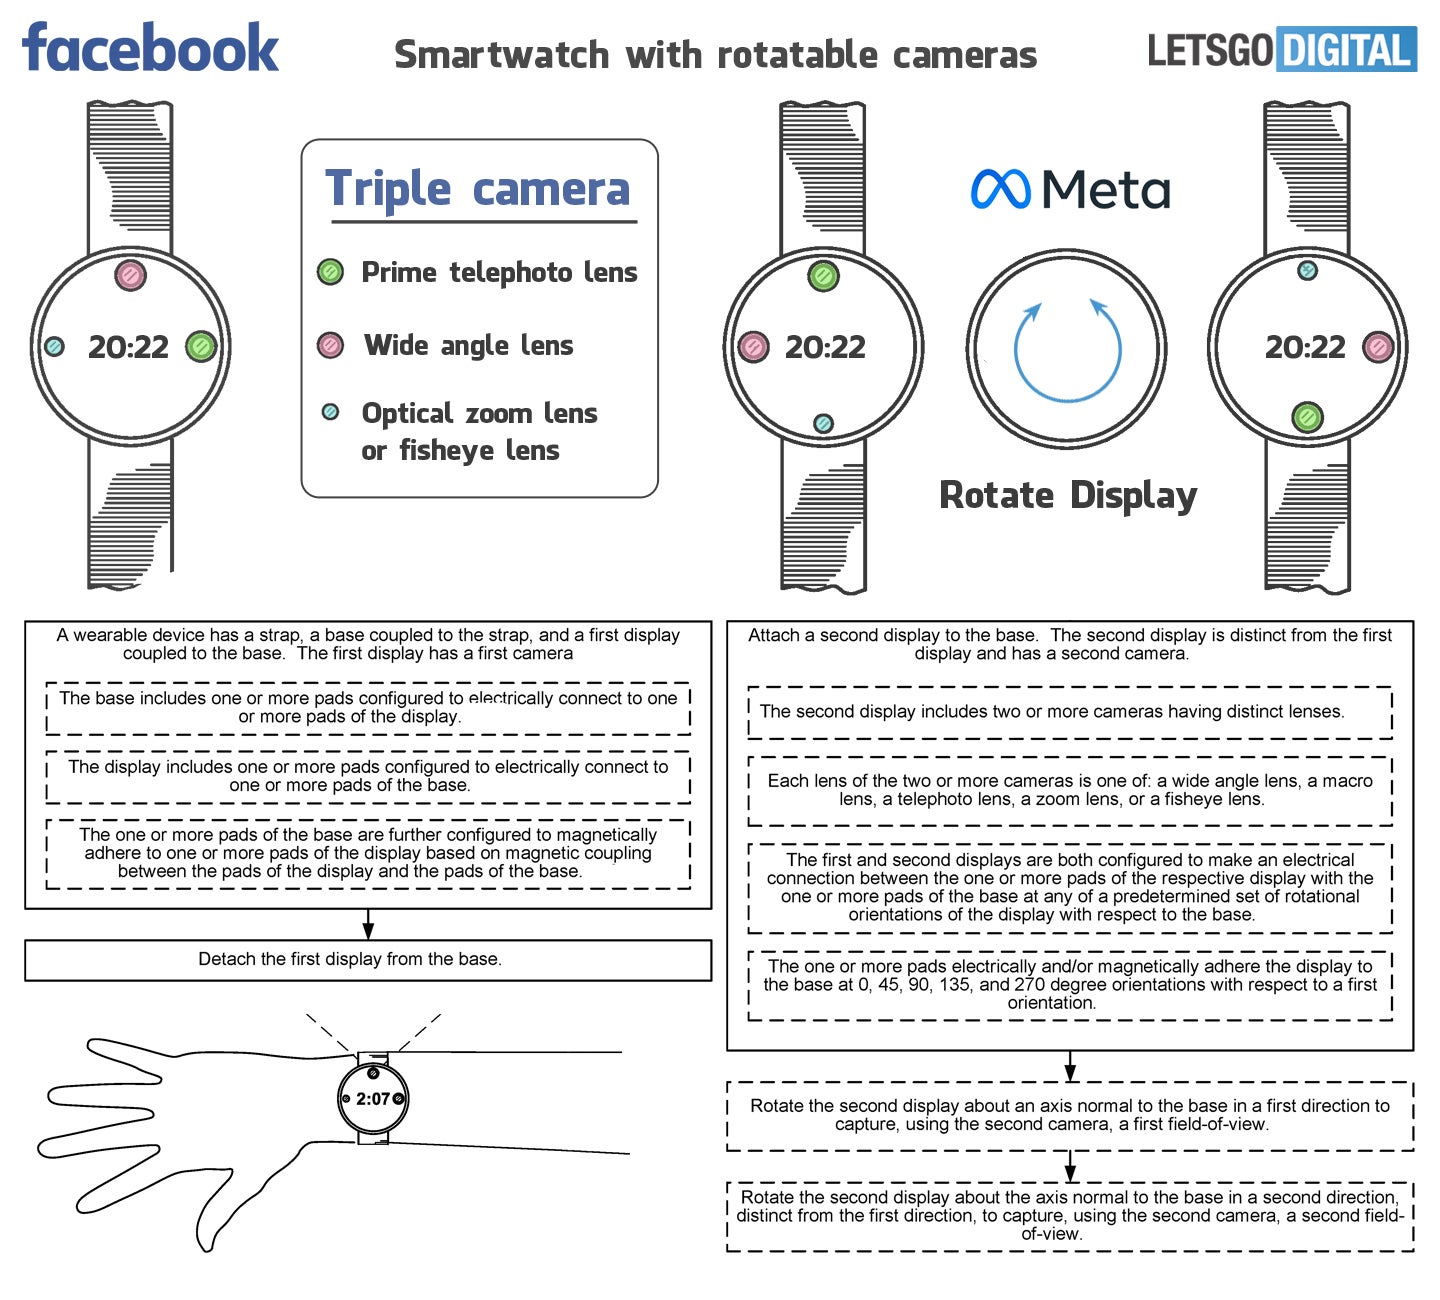 A new patent shows what the first Facebook smartwatch might look like